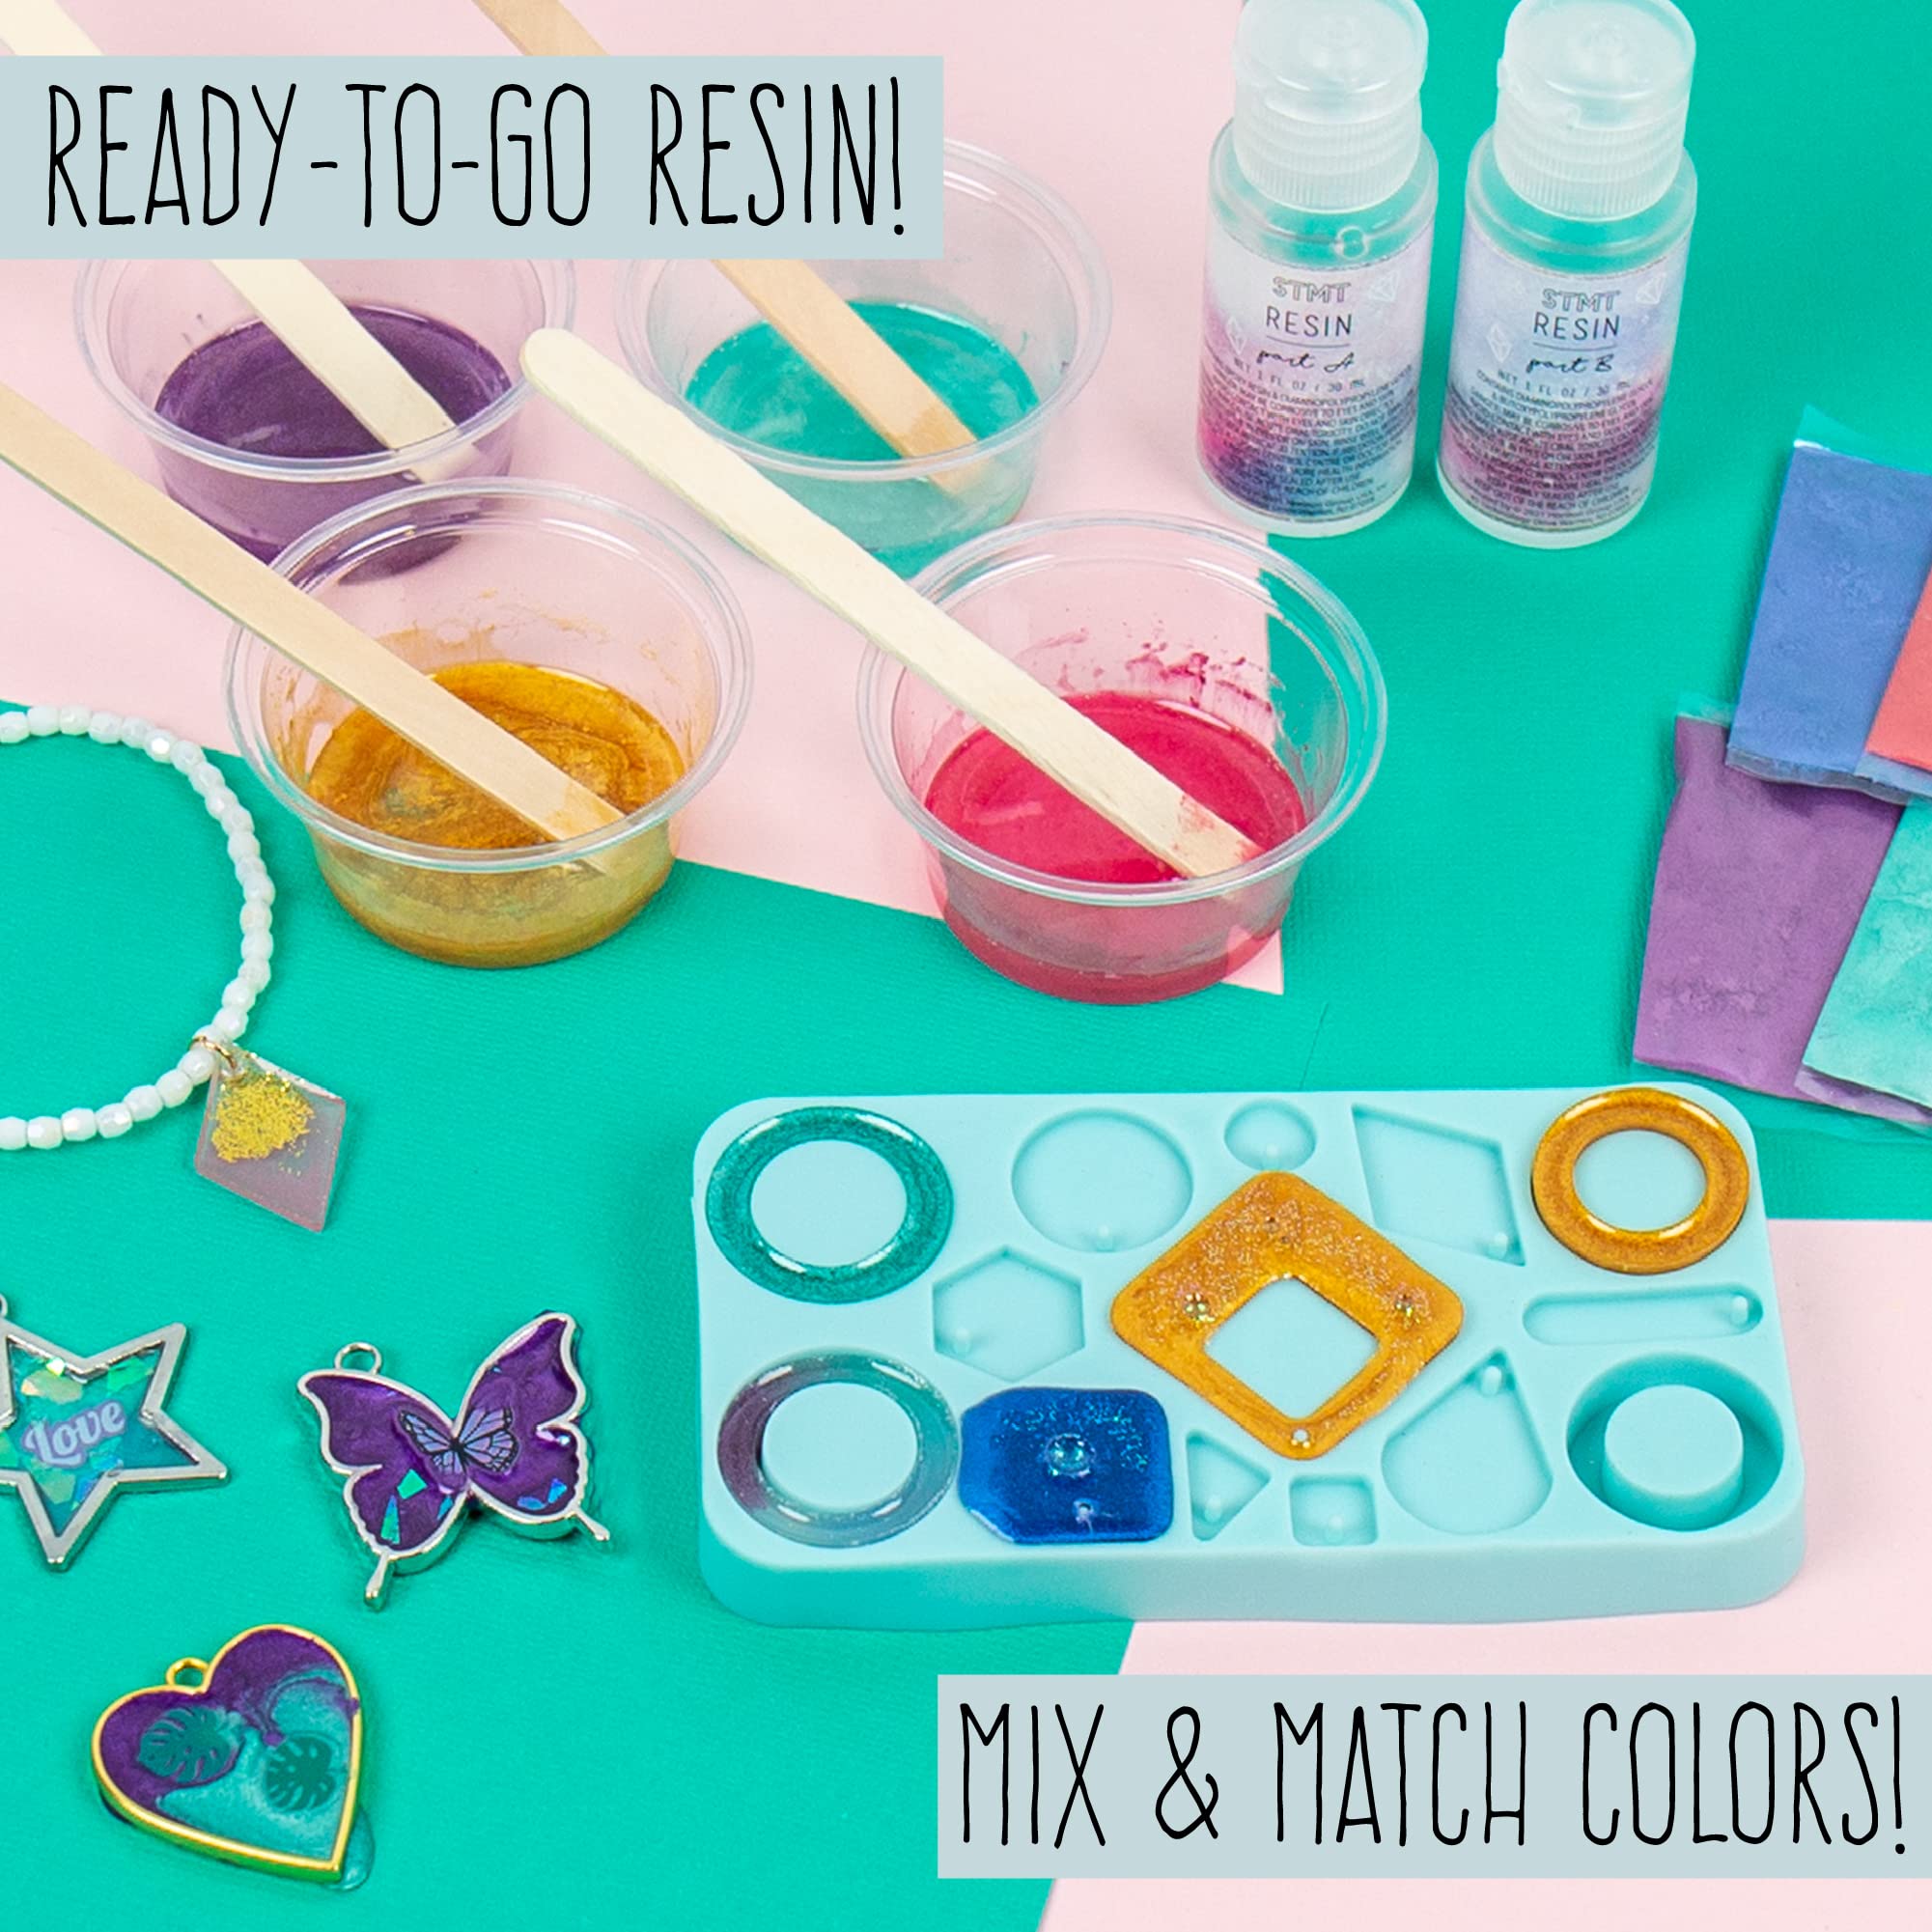 STMT D.I.Y. Resin Jewelry Studio, All-in-One Resin Jewelry Making Kit with Molds, Fun DIY Kit to Make Your Own Necklaces, Bracelets & More, Great Gift for Teen Girls 14+